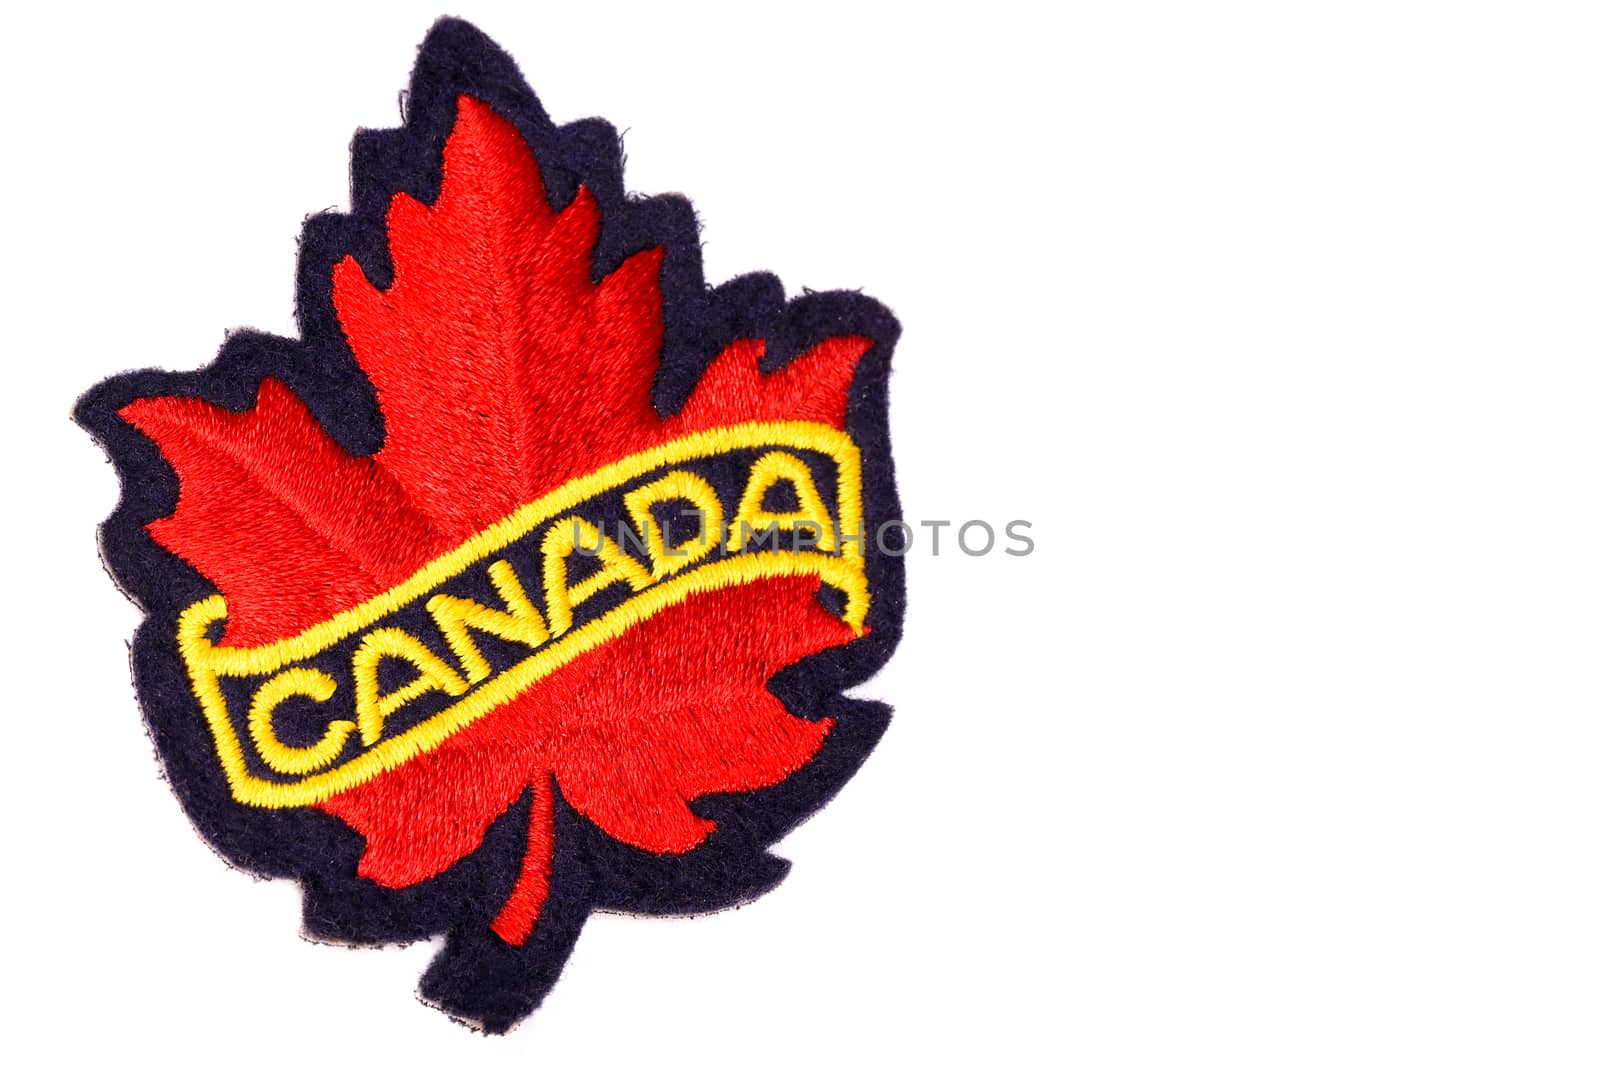 canada red maple leaf emblem made of embroidery cloth, isolated on white background